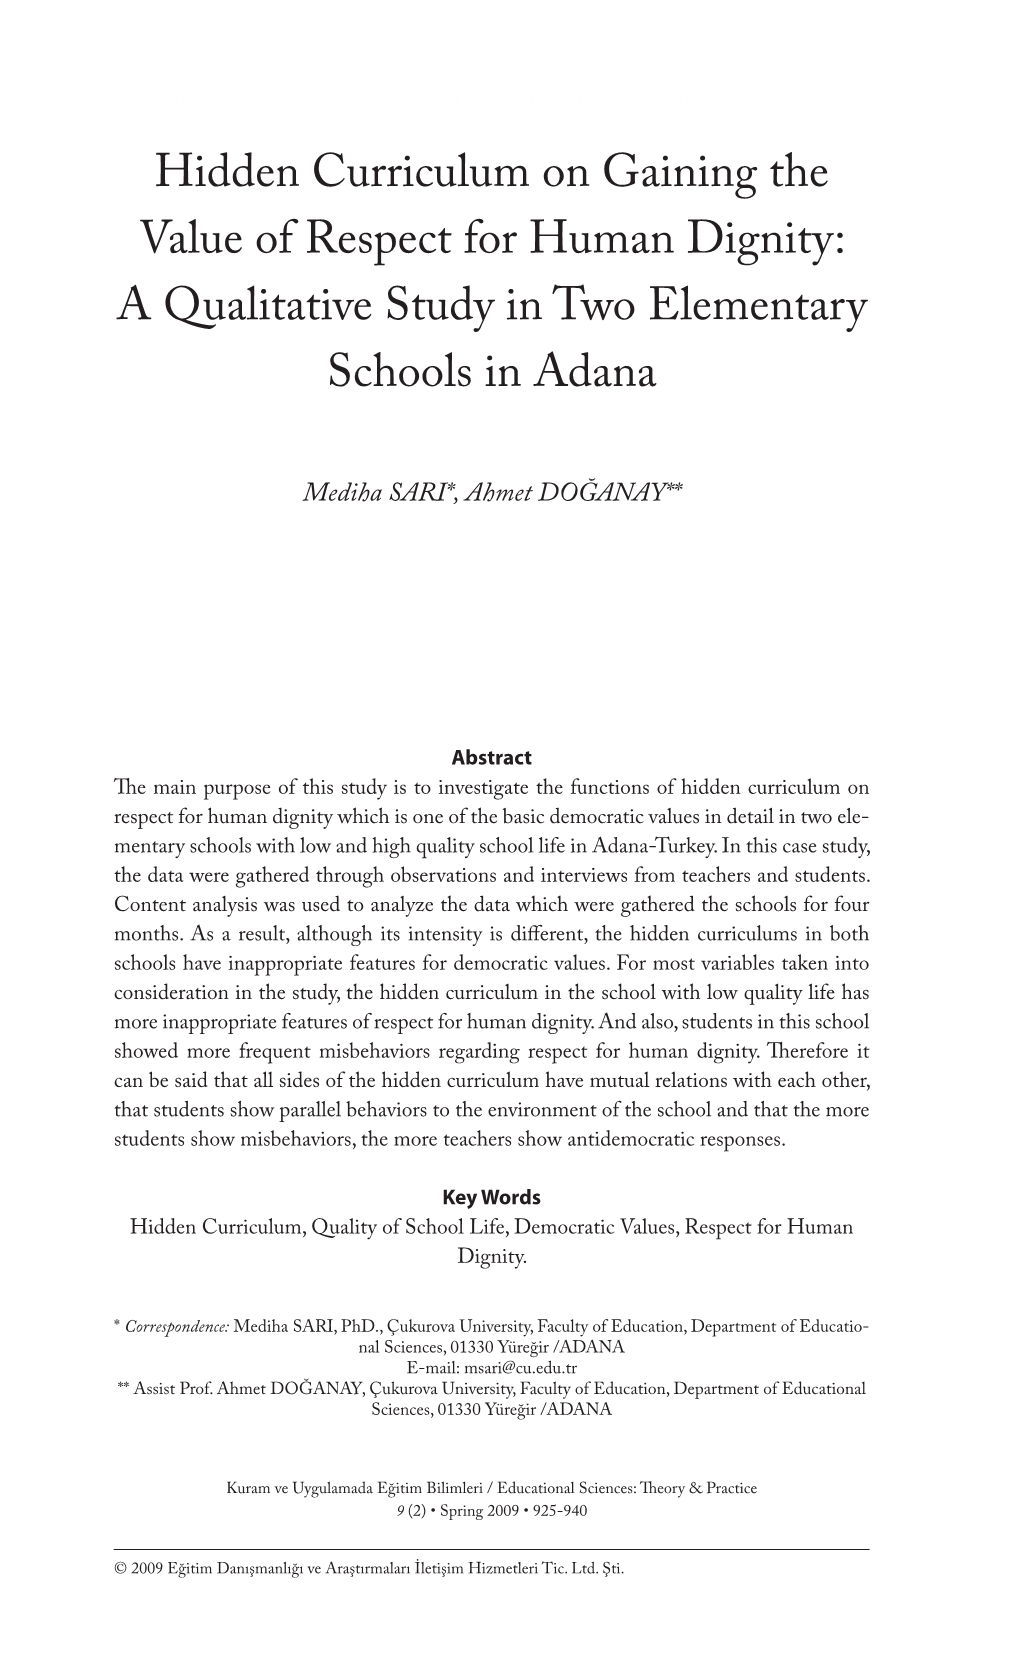 Hidden Curriculum on Gaining the Value of Respect for Human Dignity: a Qualitative Study in Two Elementary Schools in Adana